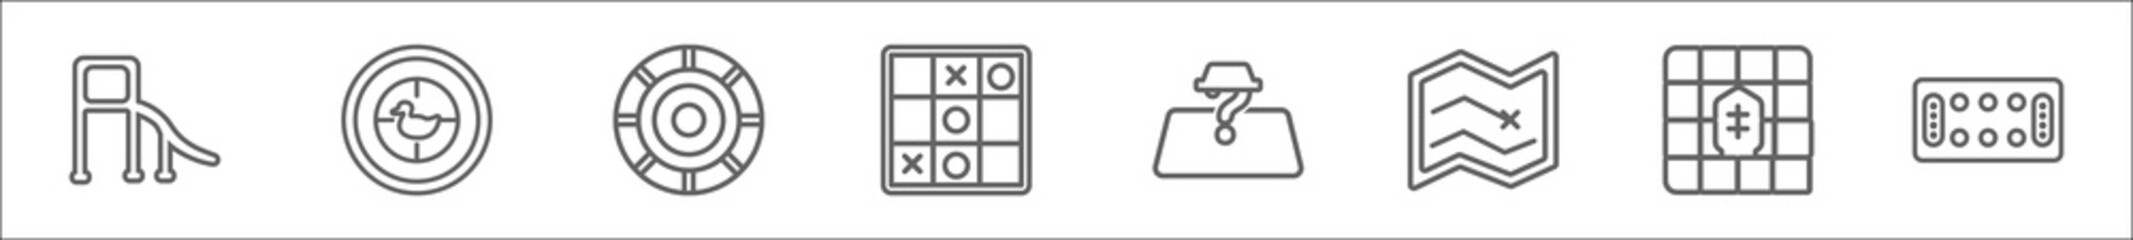 outline set of entertainment line icons. linear vector icons such as toboggan, duck shooting, game chips, logic board games, board games with roles, board game map, shogi, mancala